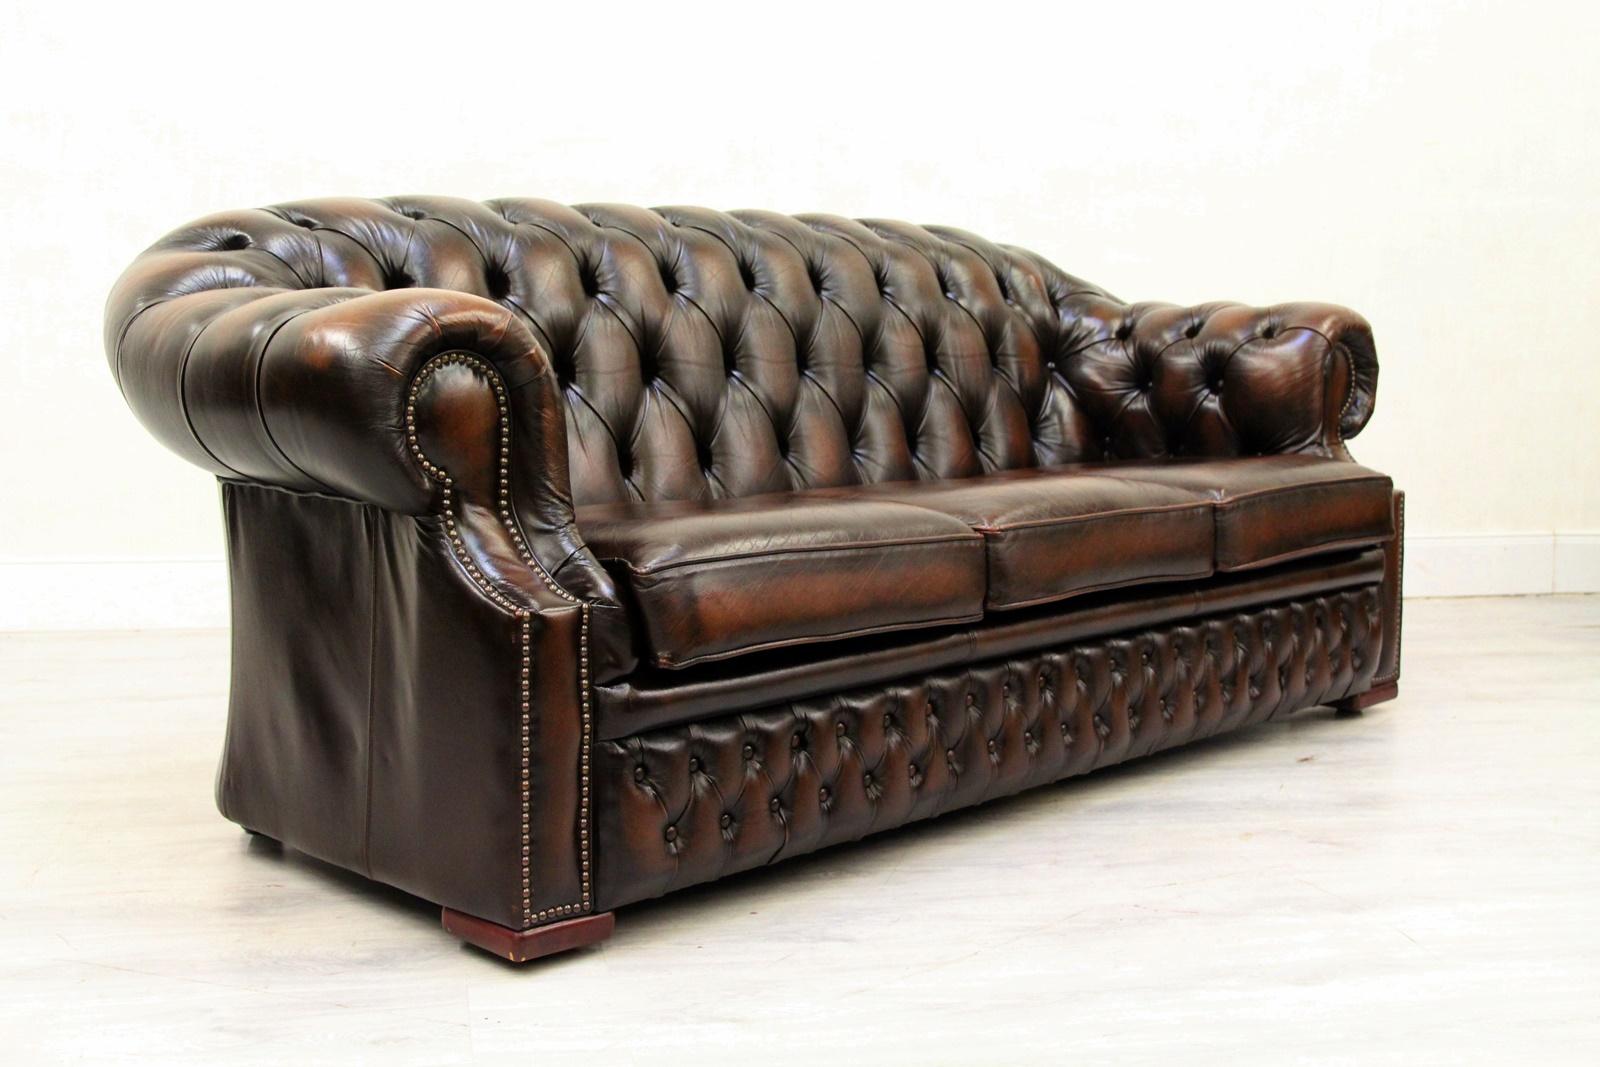 Chesterfield Centurion Sofa Leather Antique Vintage Couch, English For Sale 4